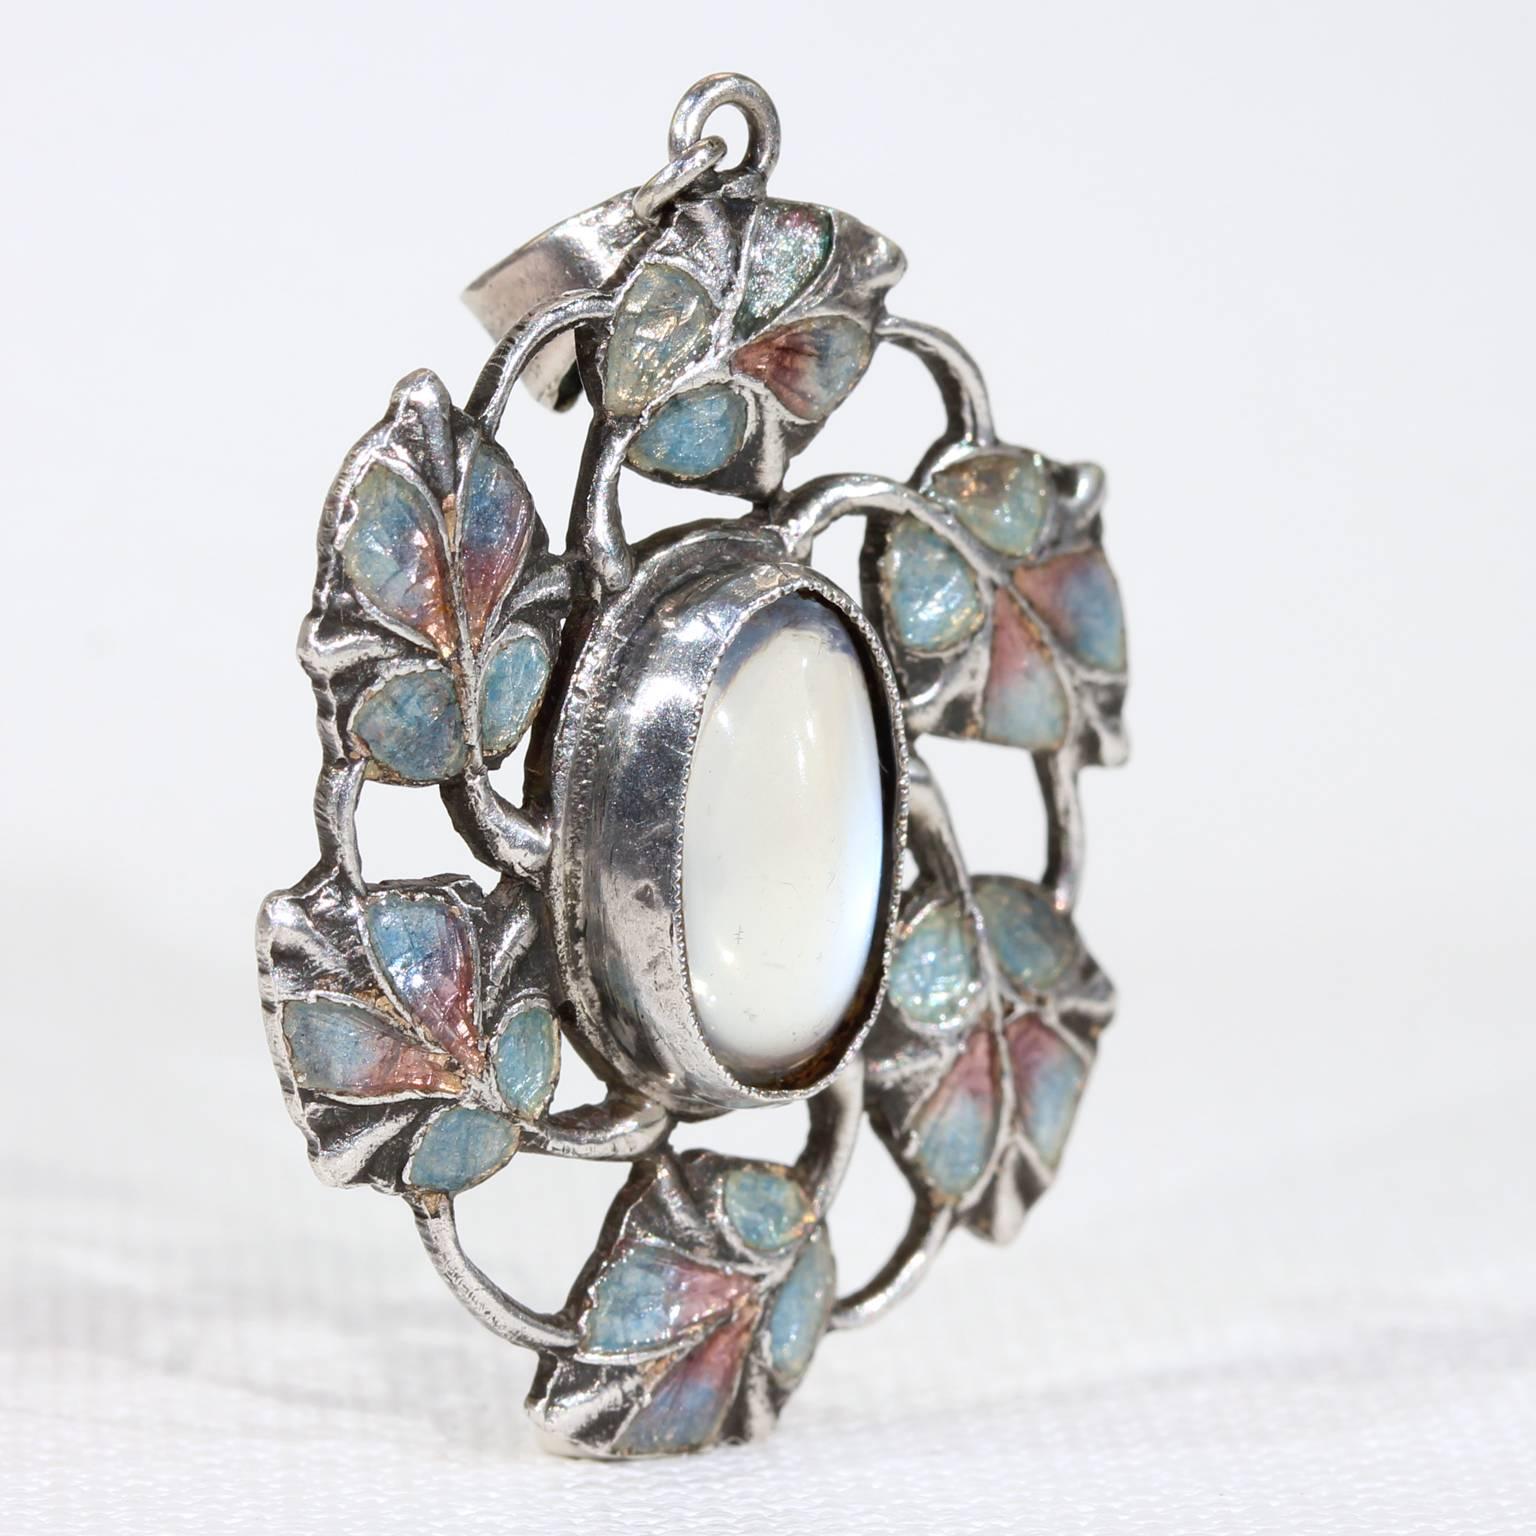 This antique, Arts and Crafts silver and moonstone pendant was handcrafted around 1910. It is attributed to Jessie M King who designed for Liberty of London. The silver pendant is set with a lively blue 2.6 carat cabochon moonstone and highlighted